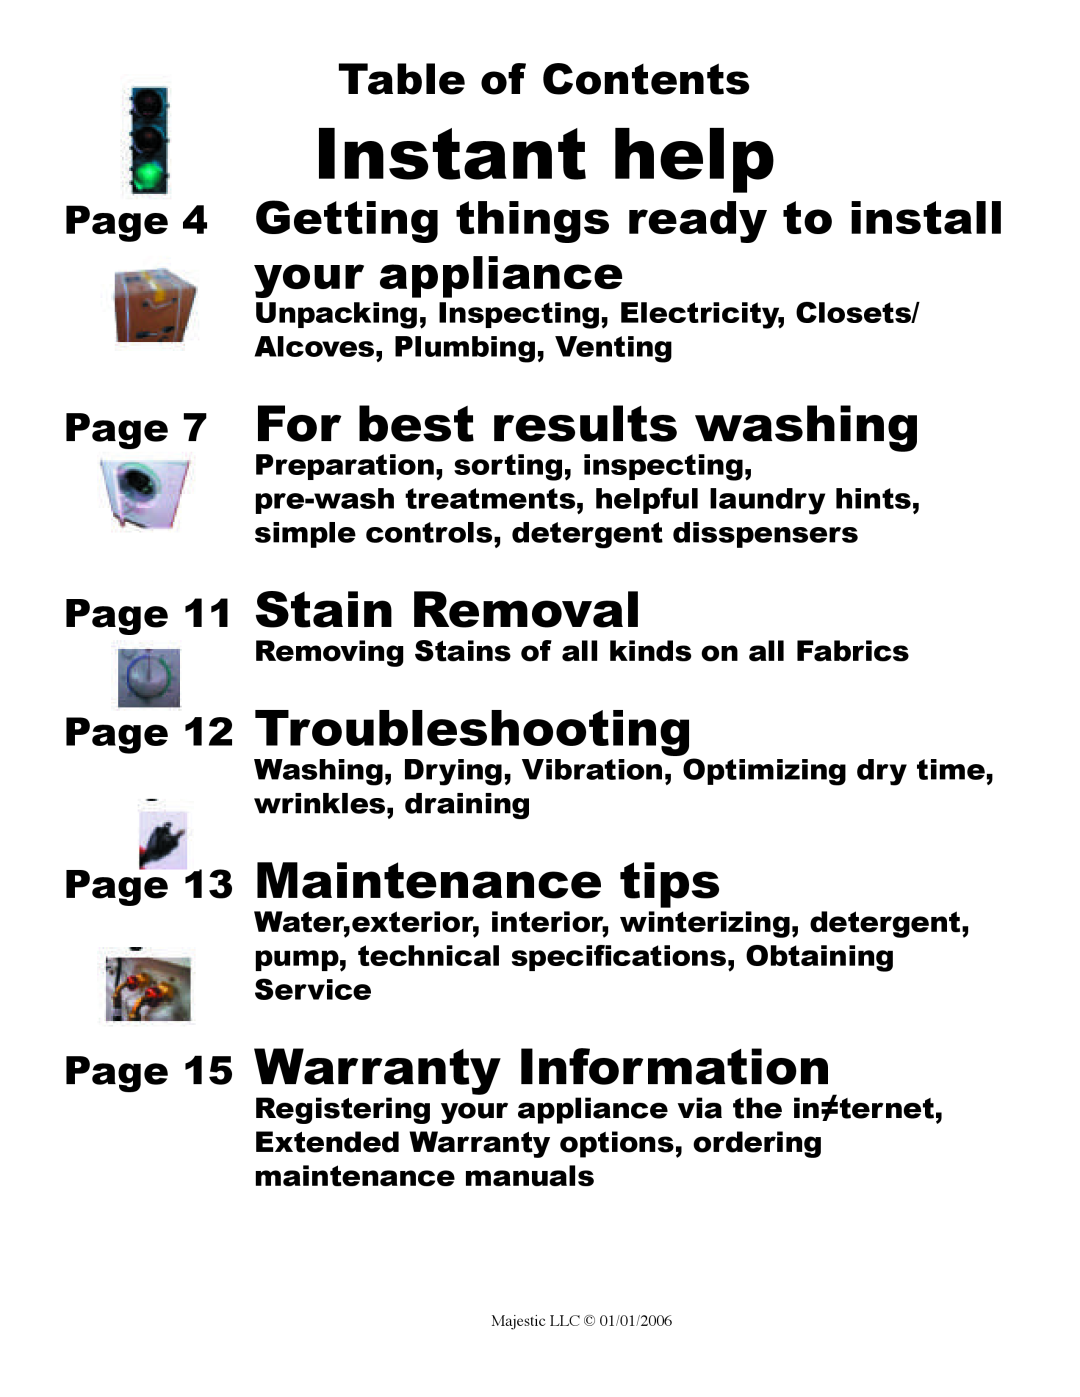 Majestic Appliances MJ-9200W Instant help, Page 7 For best results washing, Page 11 Stain Removal, Page 12 Troubleshooting 